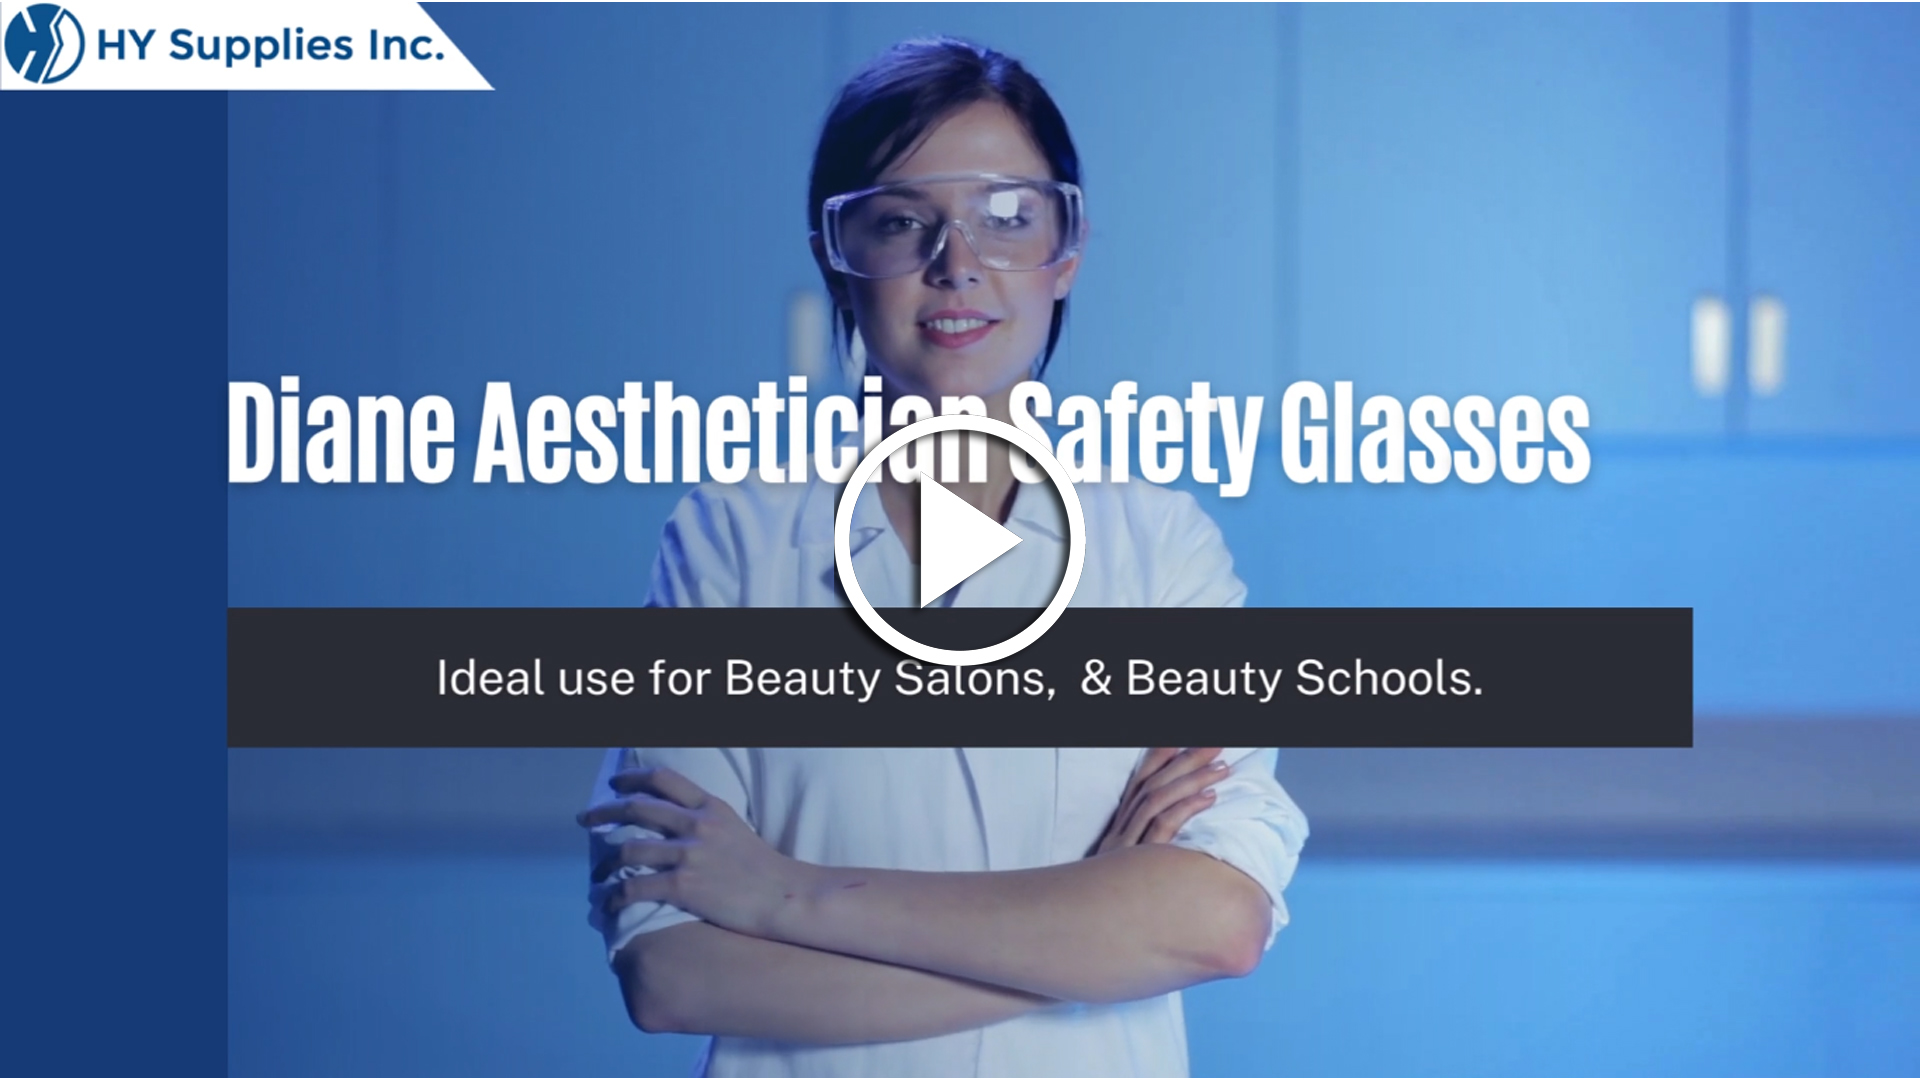 Diane Aesthetician Safety Glasses